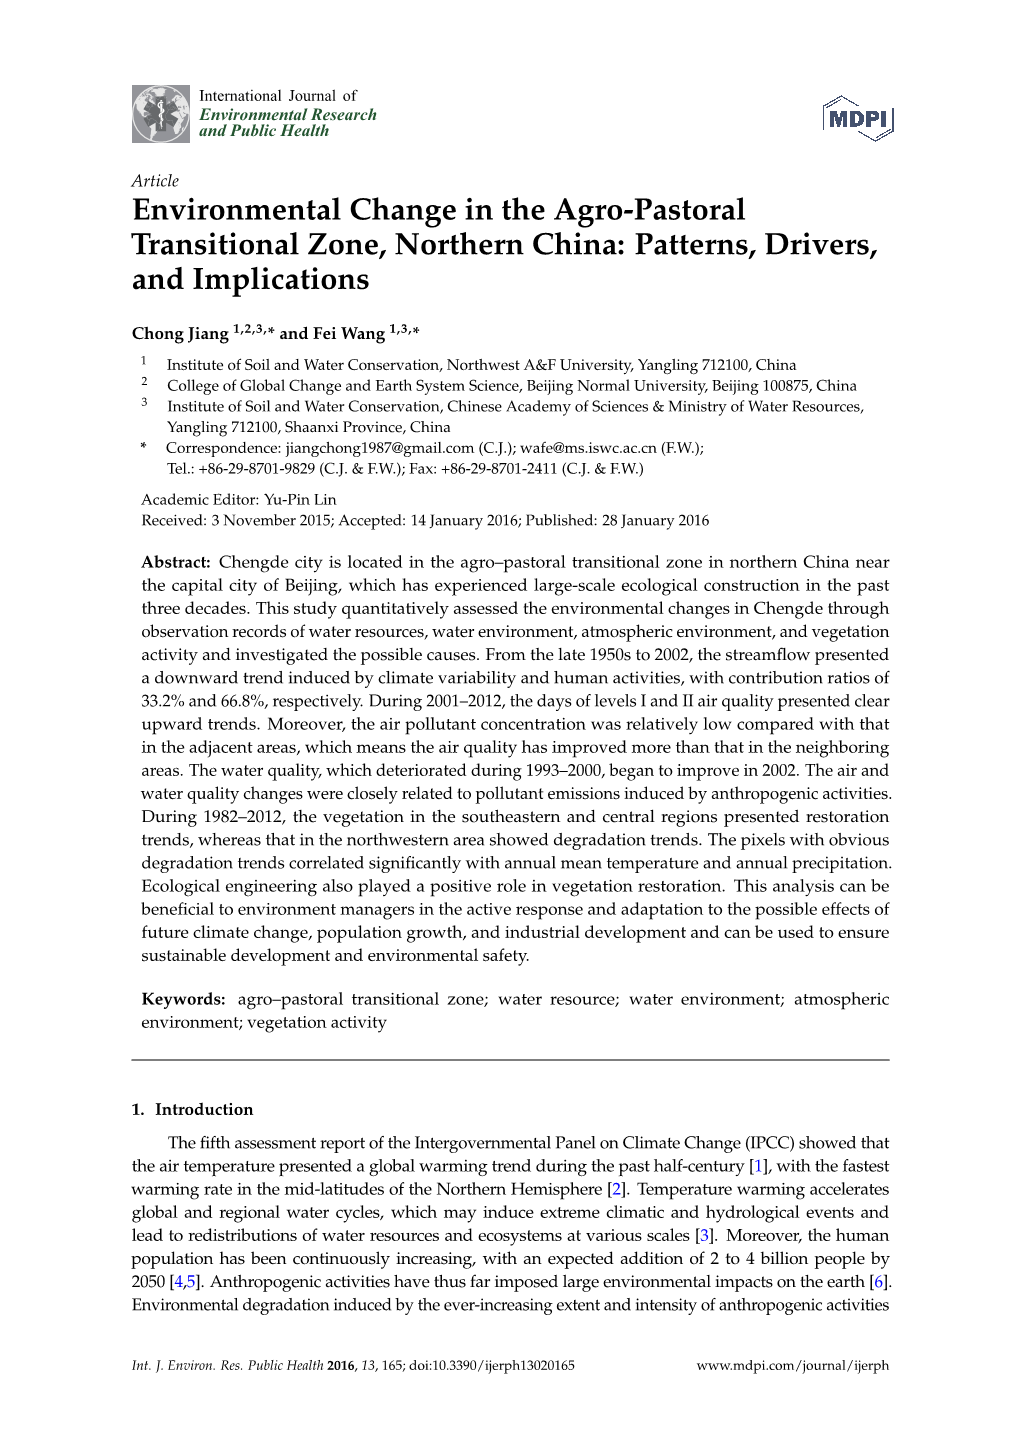 Environmental Change in the Agro-Pastoral Transitional Zone, Northern China: Patterns, Drivers, and Implications